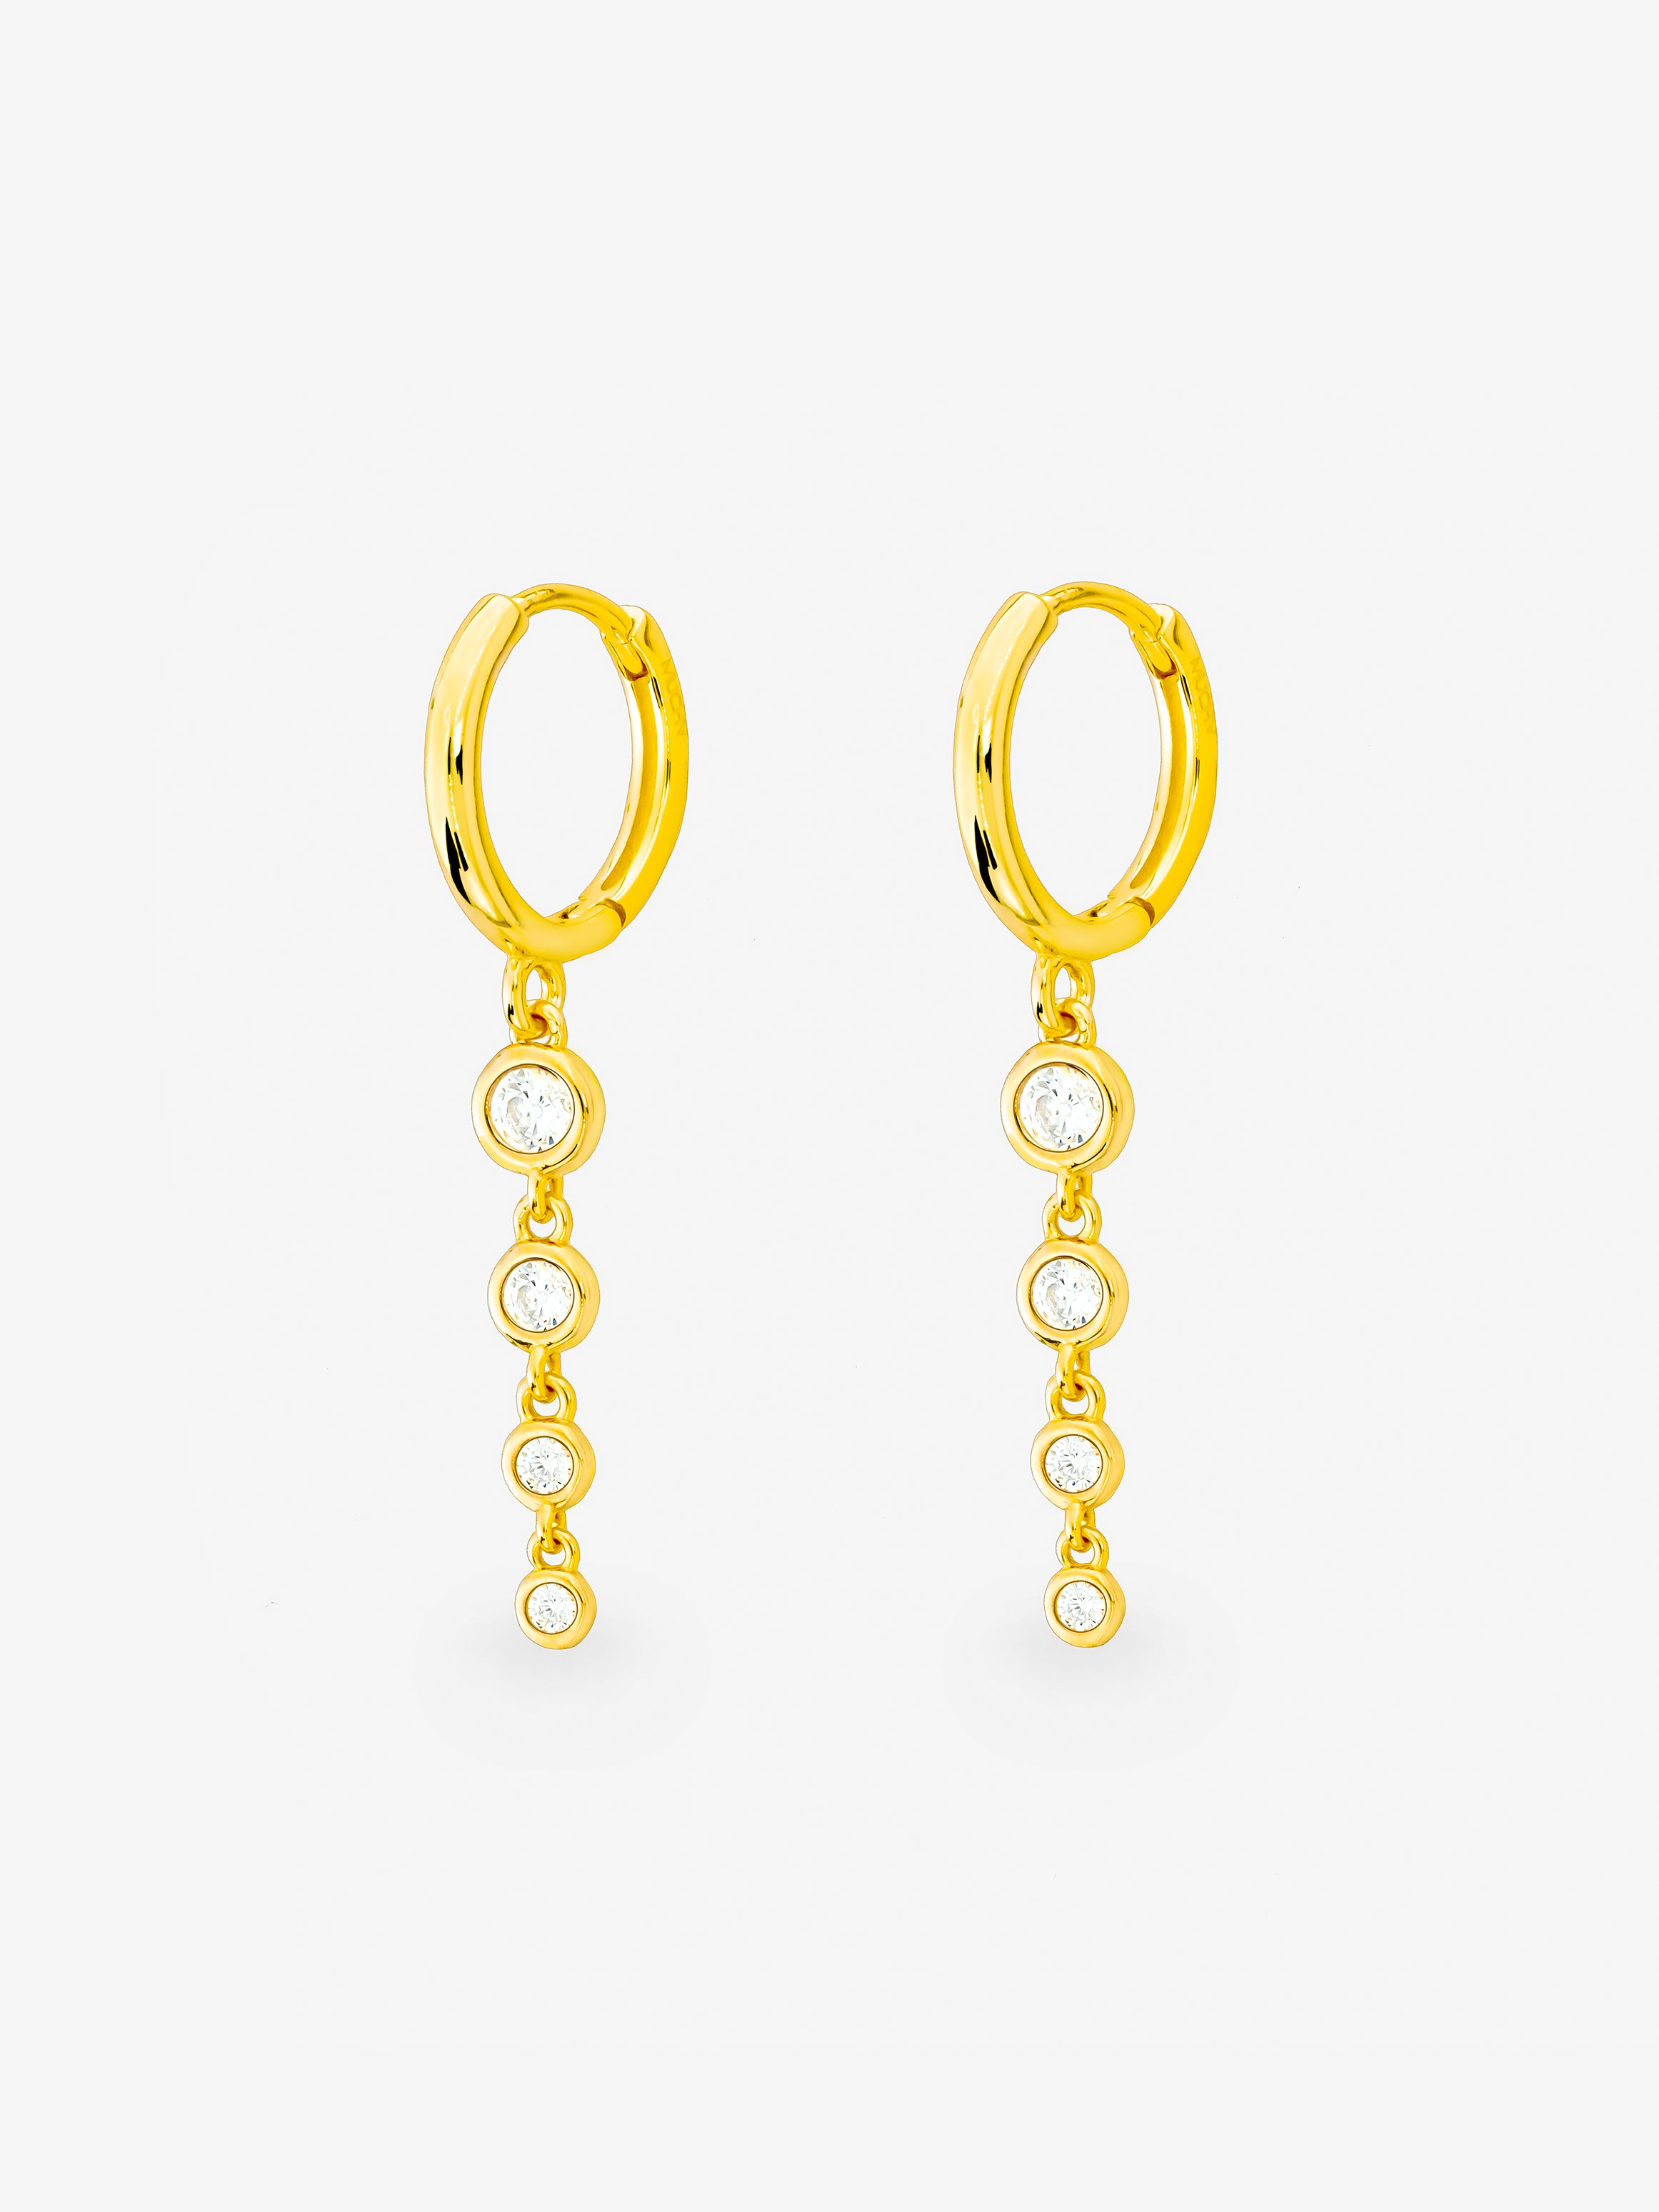 Gold Dangle Hoop Earrings With Round Charms